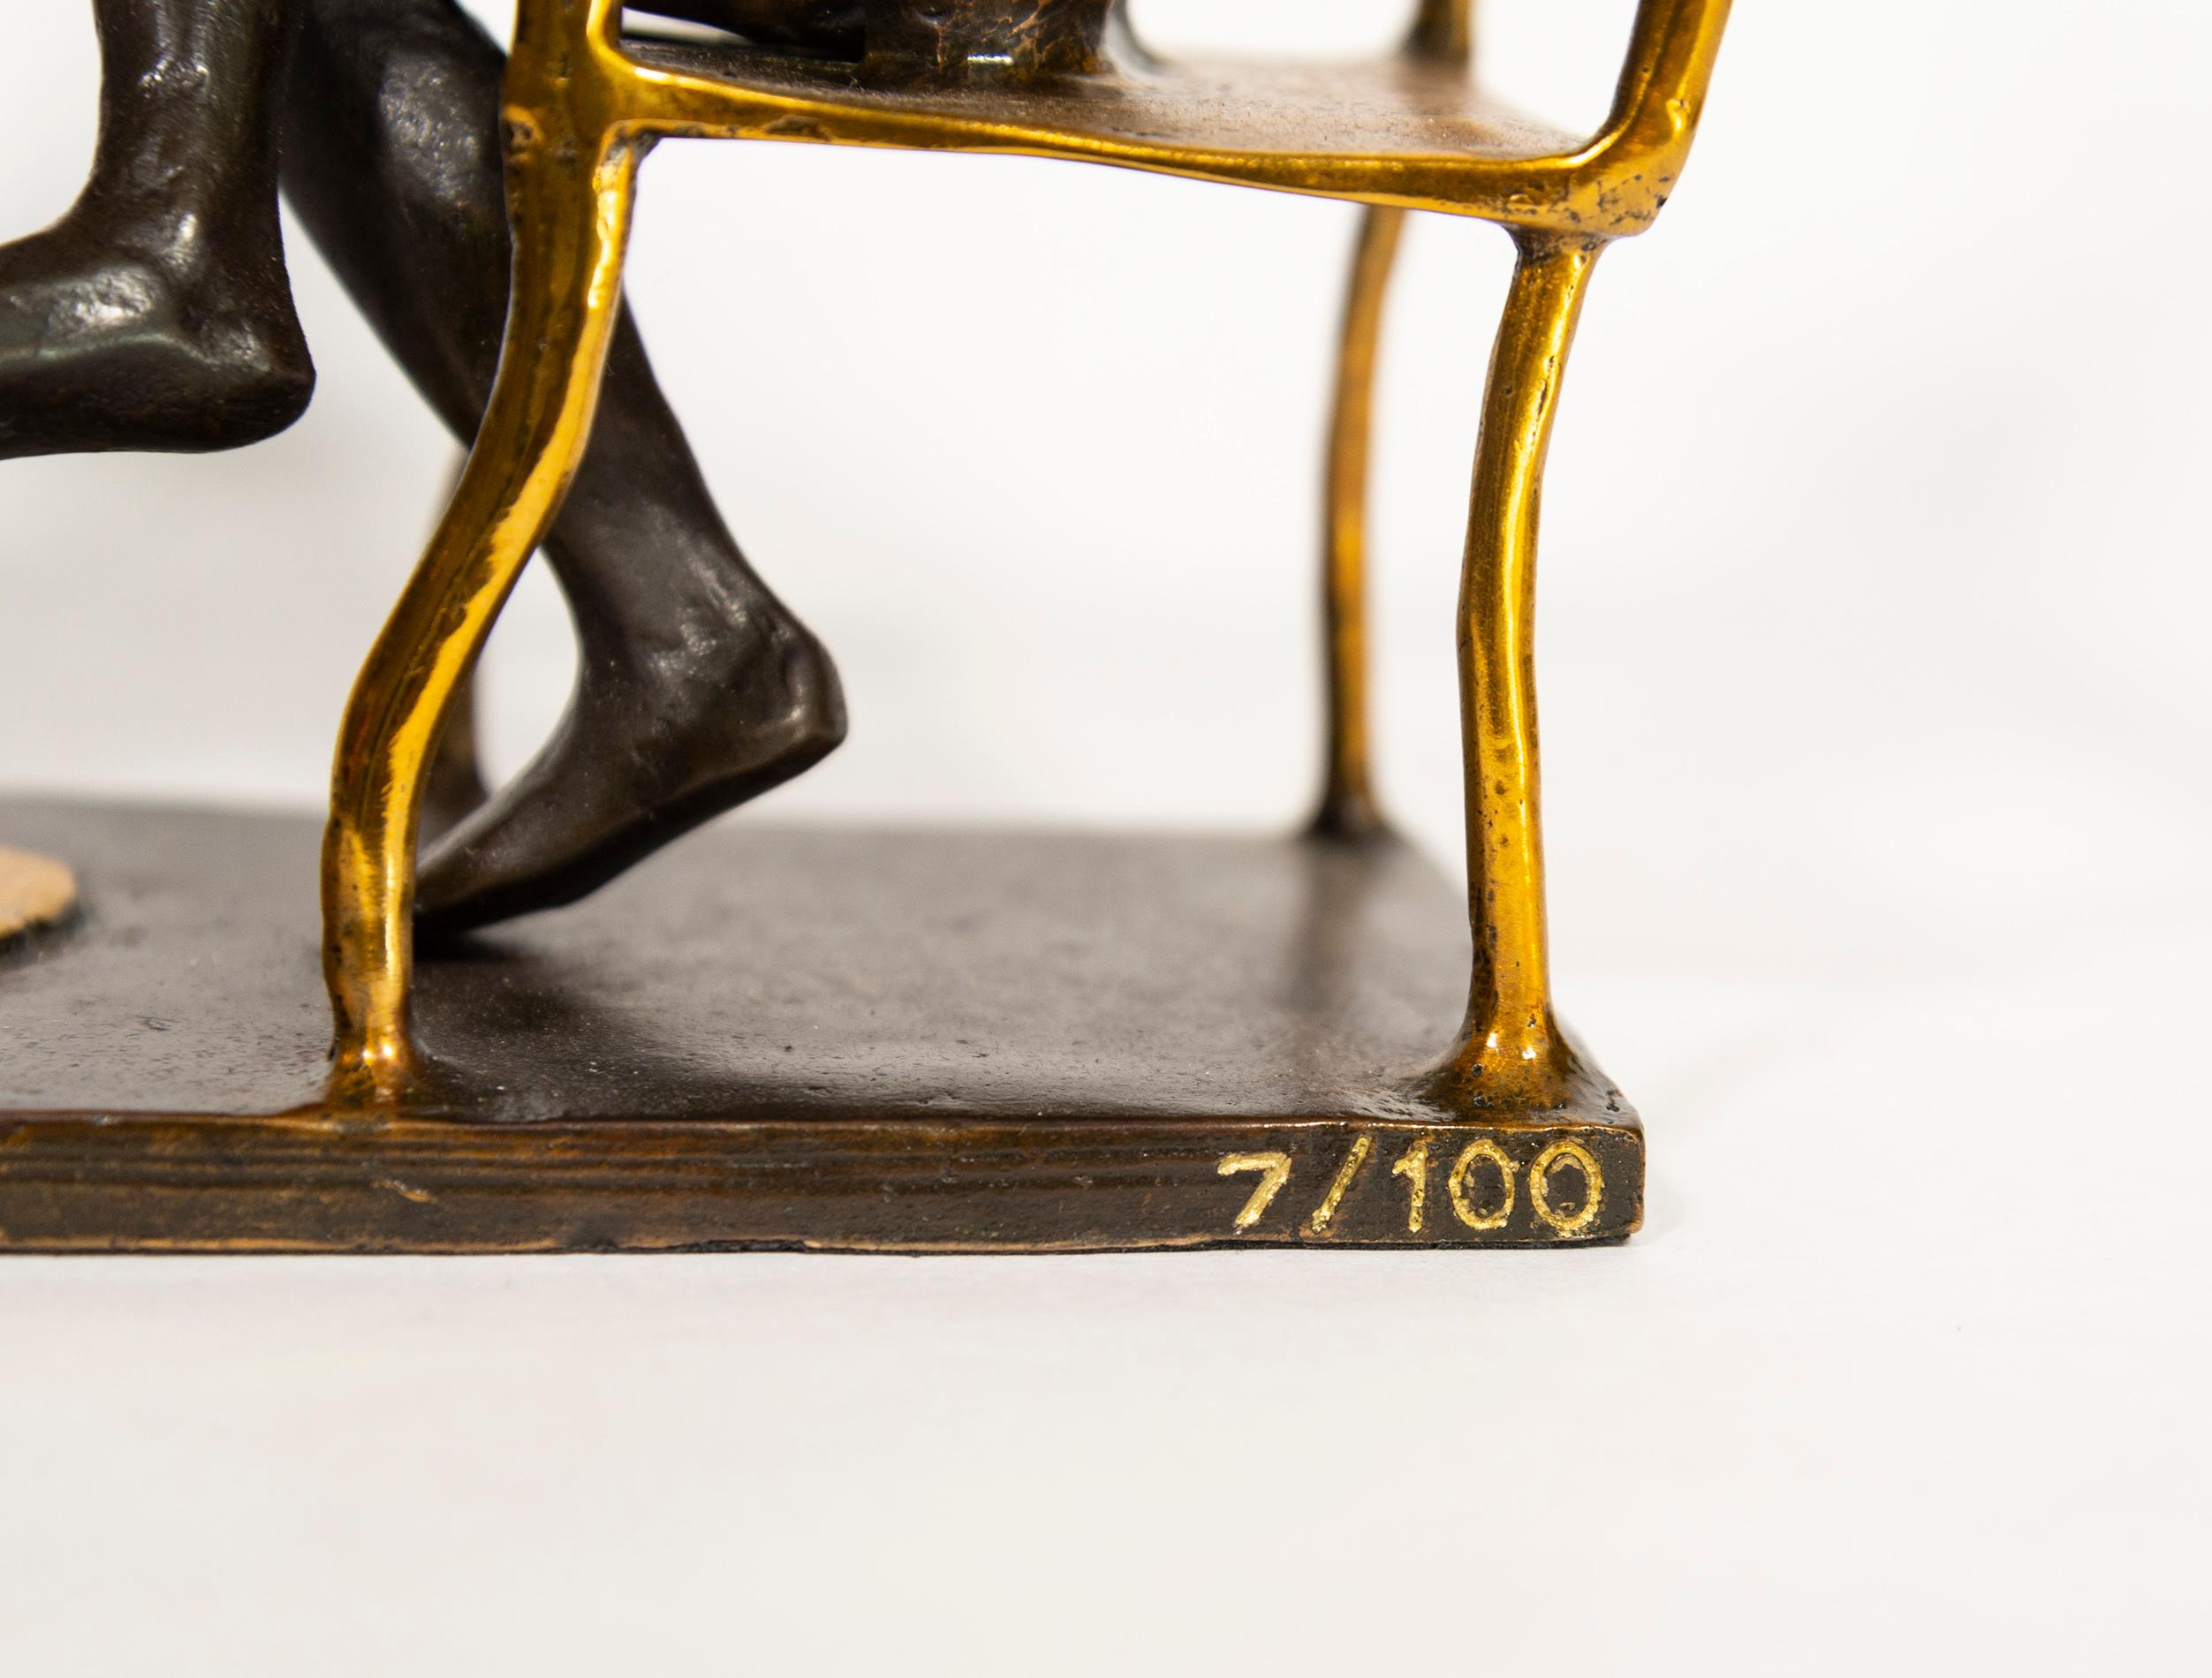 Reprising their popular hybrid sculptures, Gillie and Marc have created this whimsical tabletop piece cast in bronze. Designed to represent the spiritual connection humans share with animals, a rabbit woman is sitting across from a dogman at a